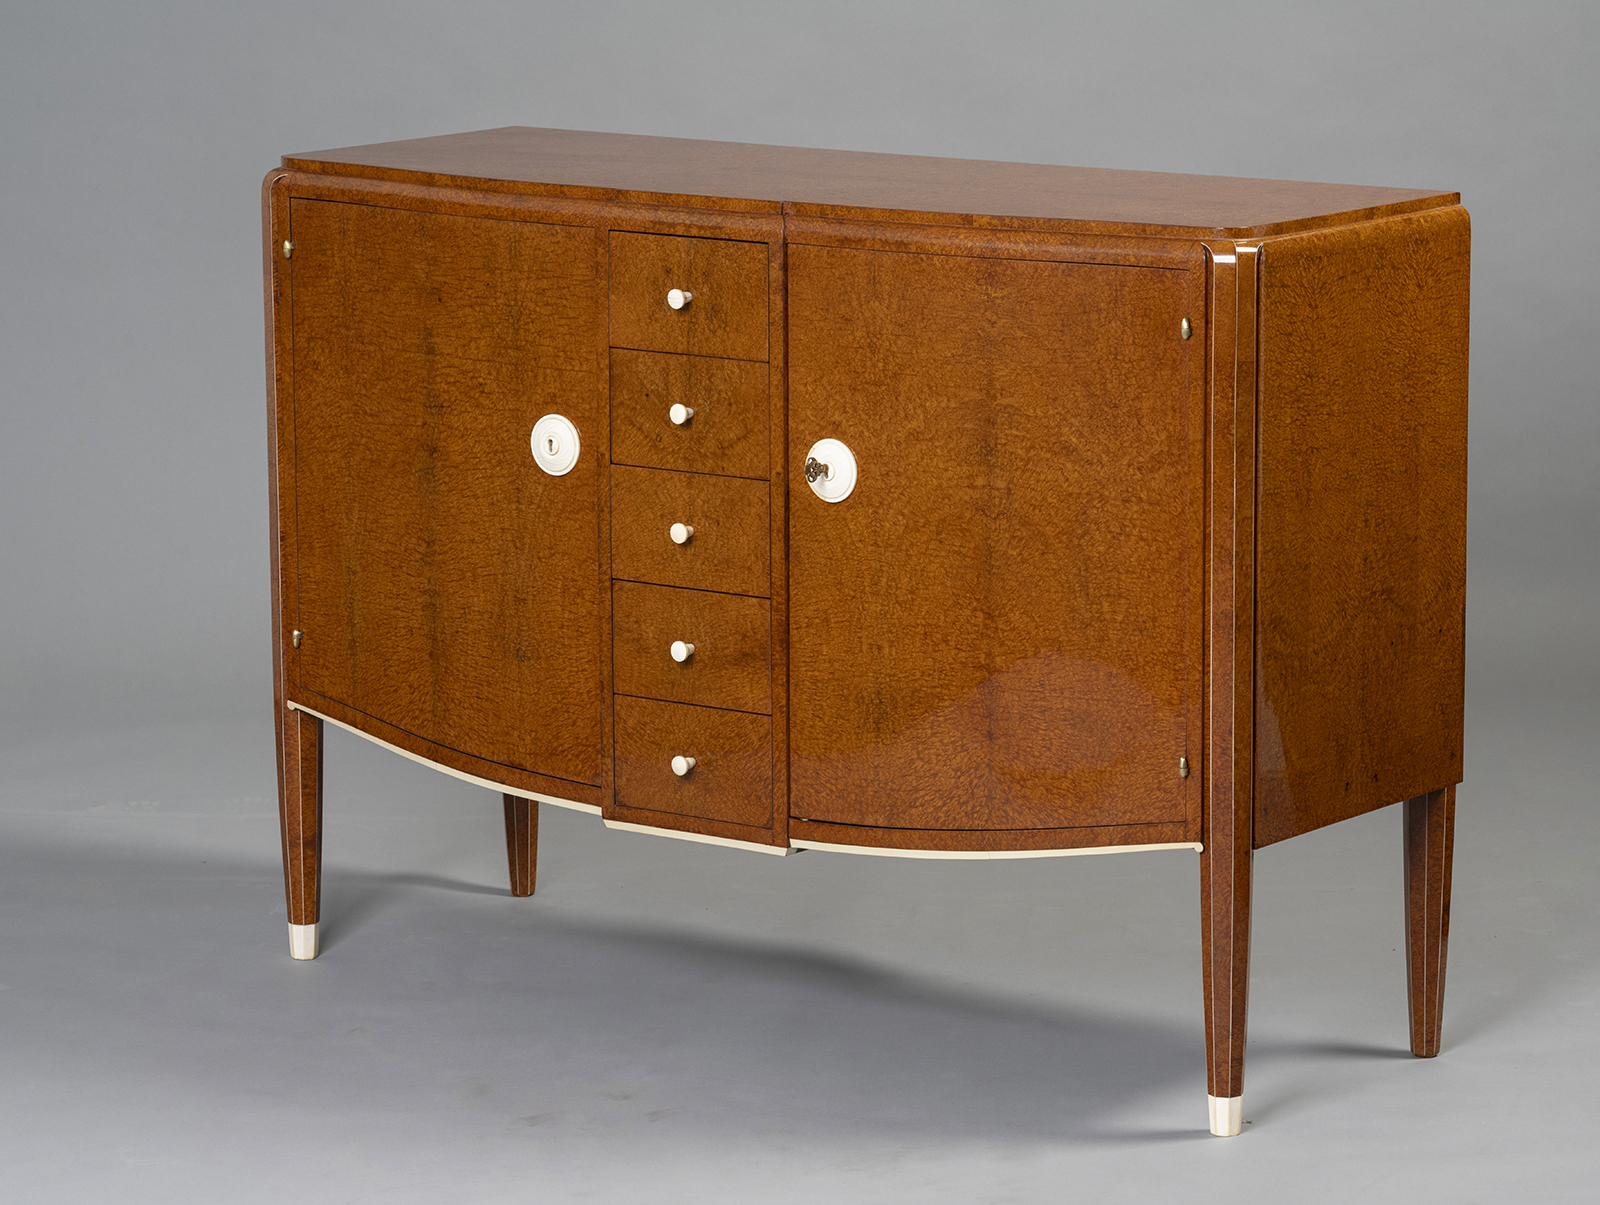 An Iconic and Exceptional Art Deco cabinet by Jules Leleu